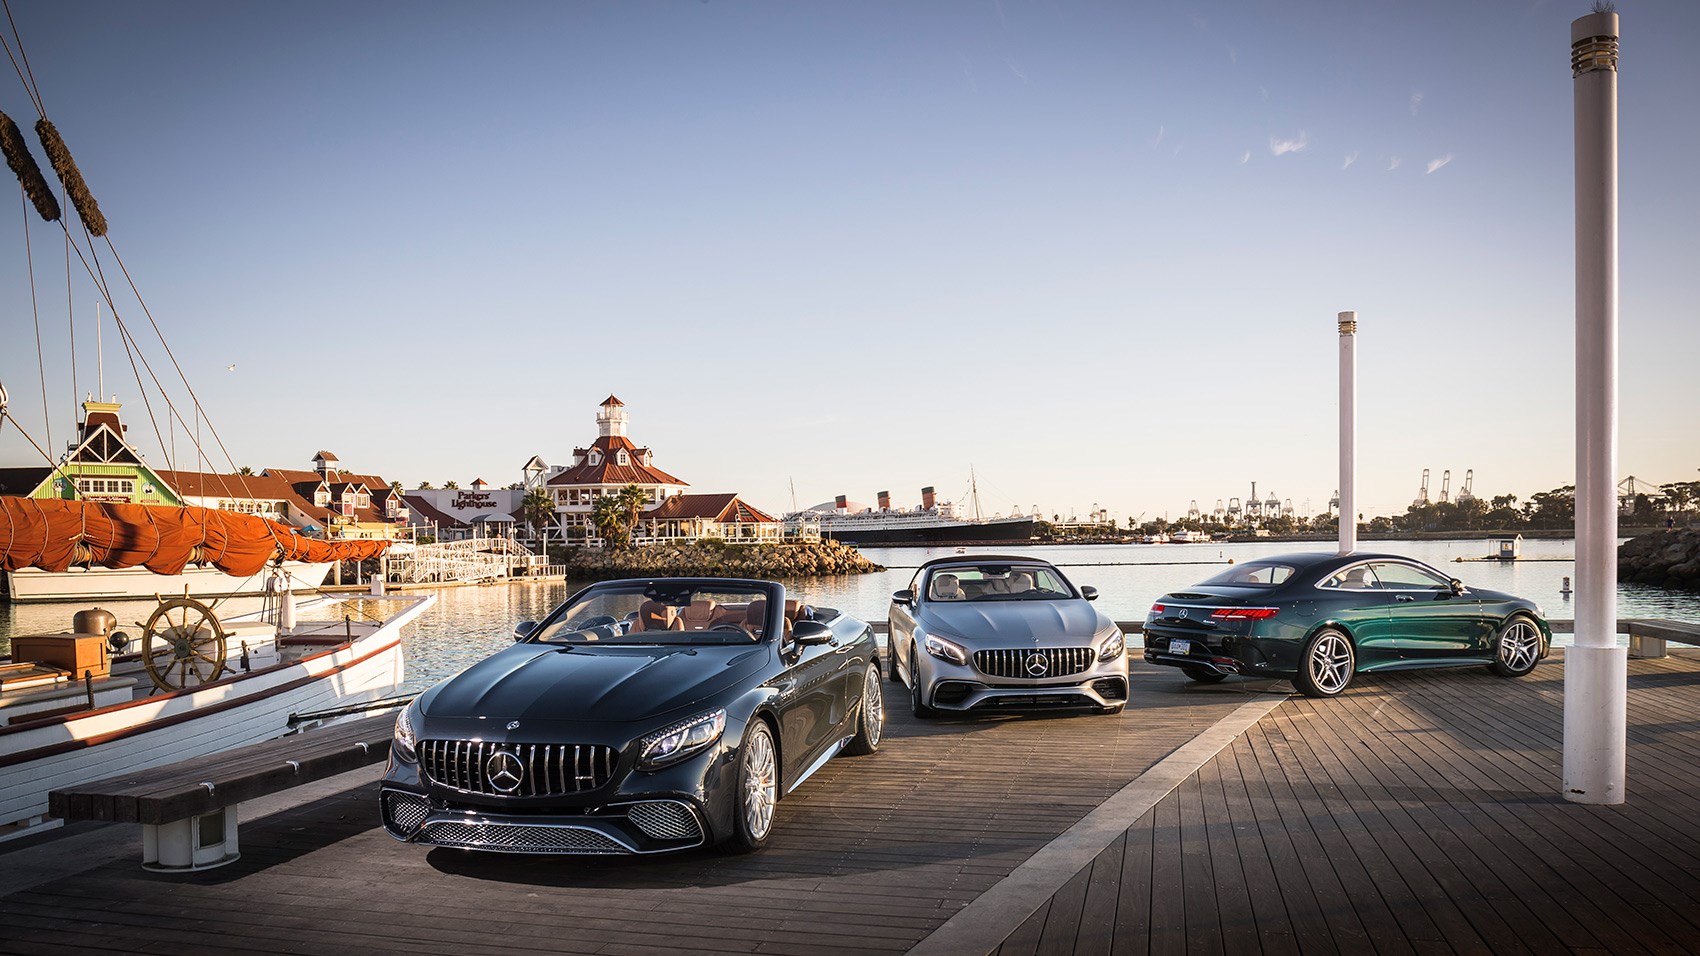 The new 2018 Mercedes S-class Coupe and Cabriolet twins. We review them all